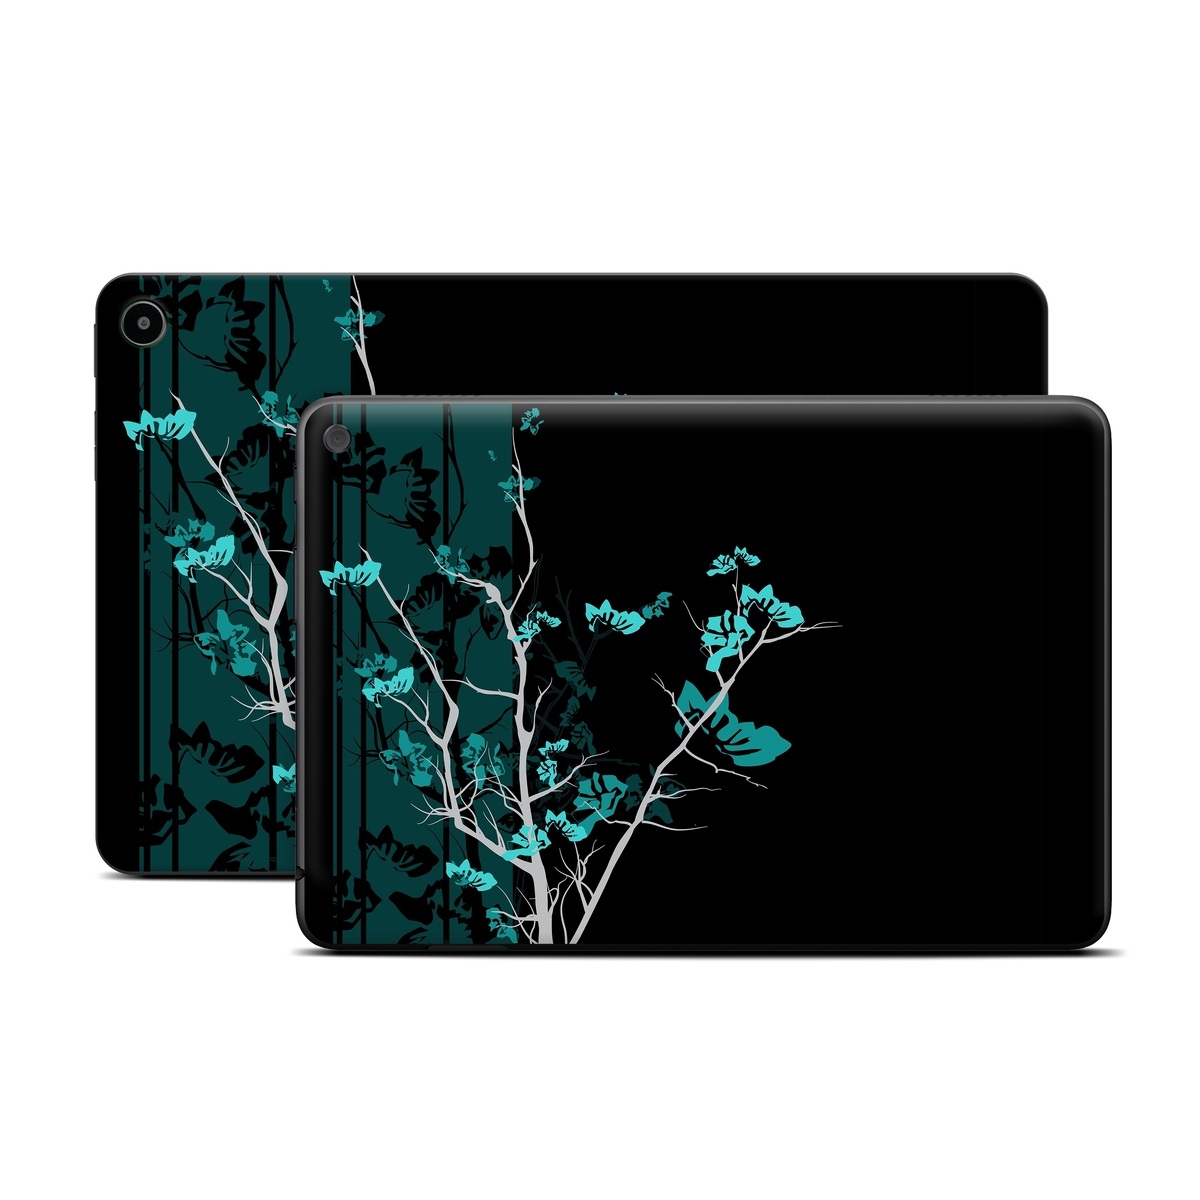  Skin design of Branch, Black, Blue, Green, Turquoise, Teal, Tree, Plant, Graphic design, Twig, with black, blue, gray colors